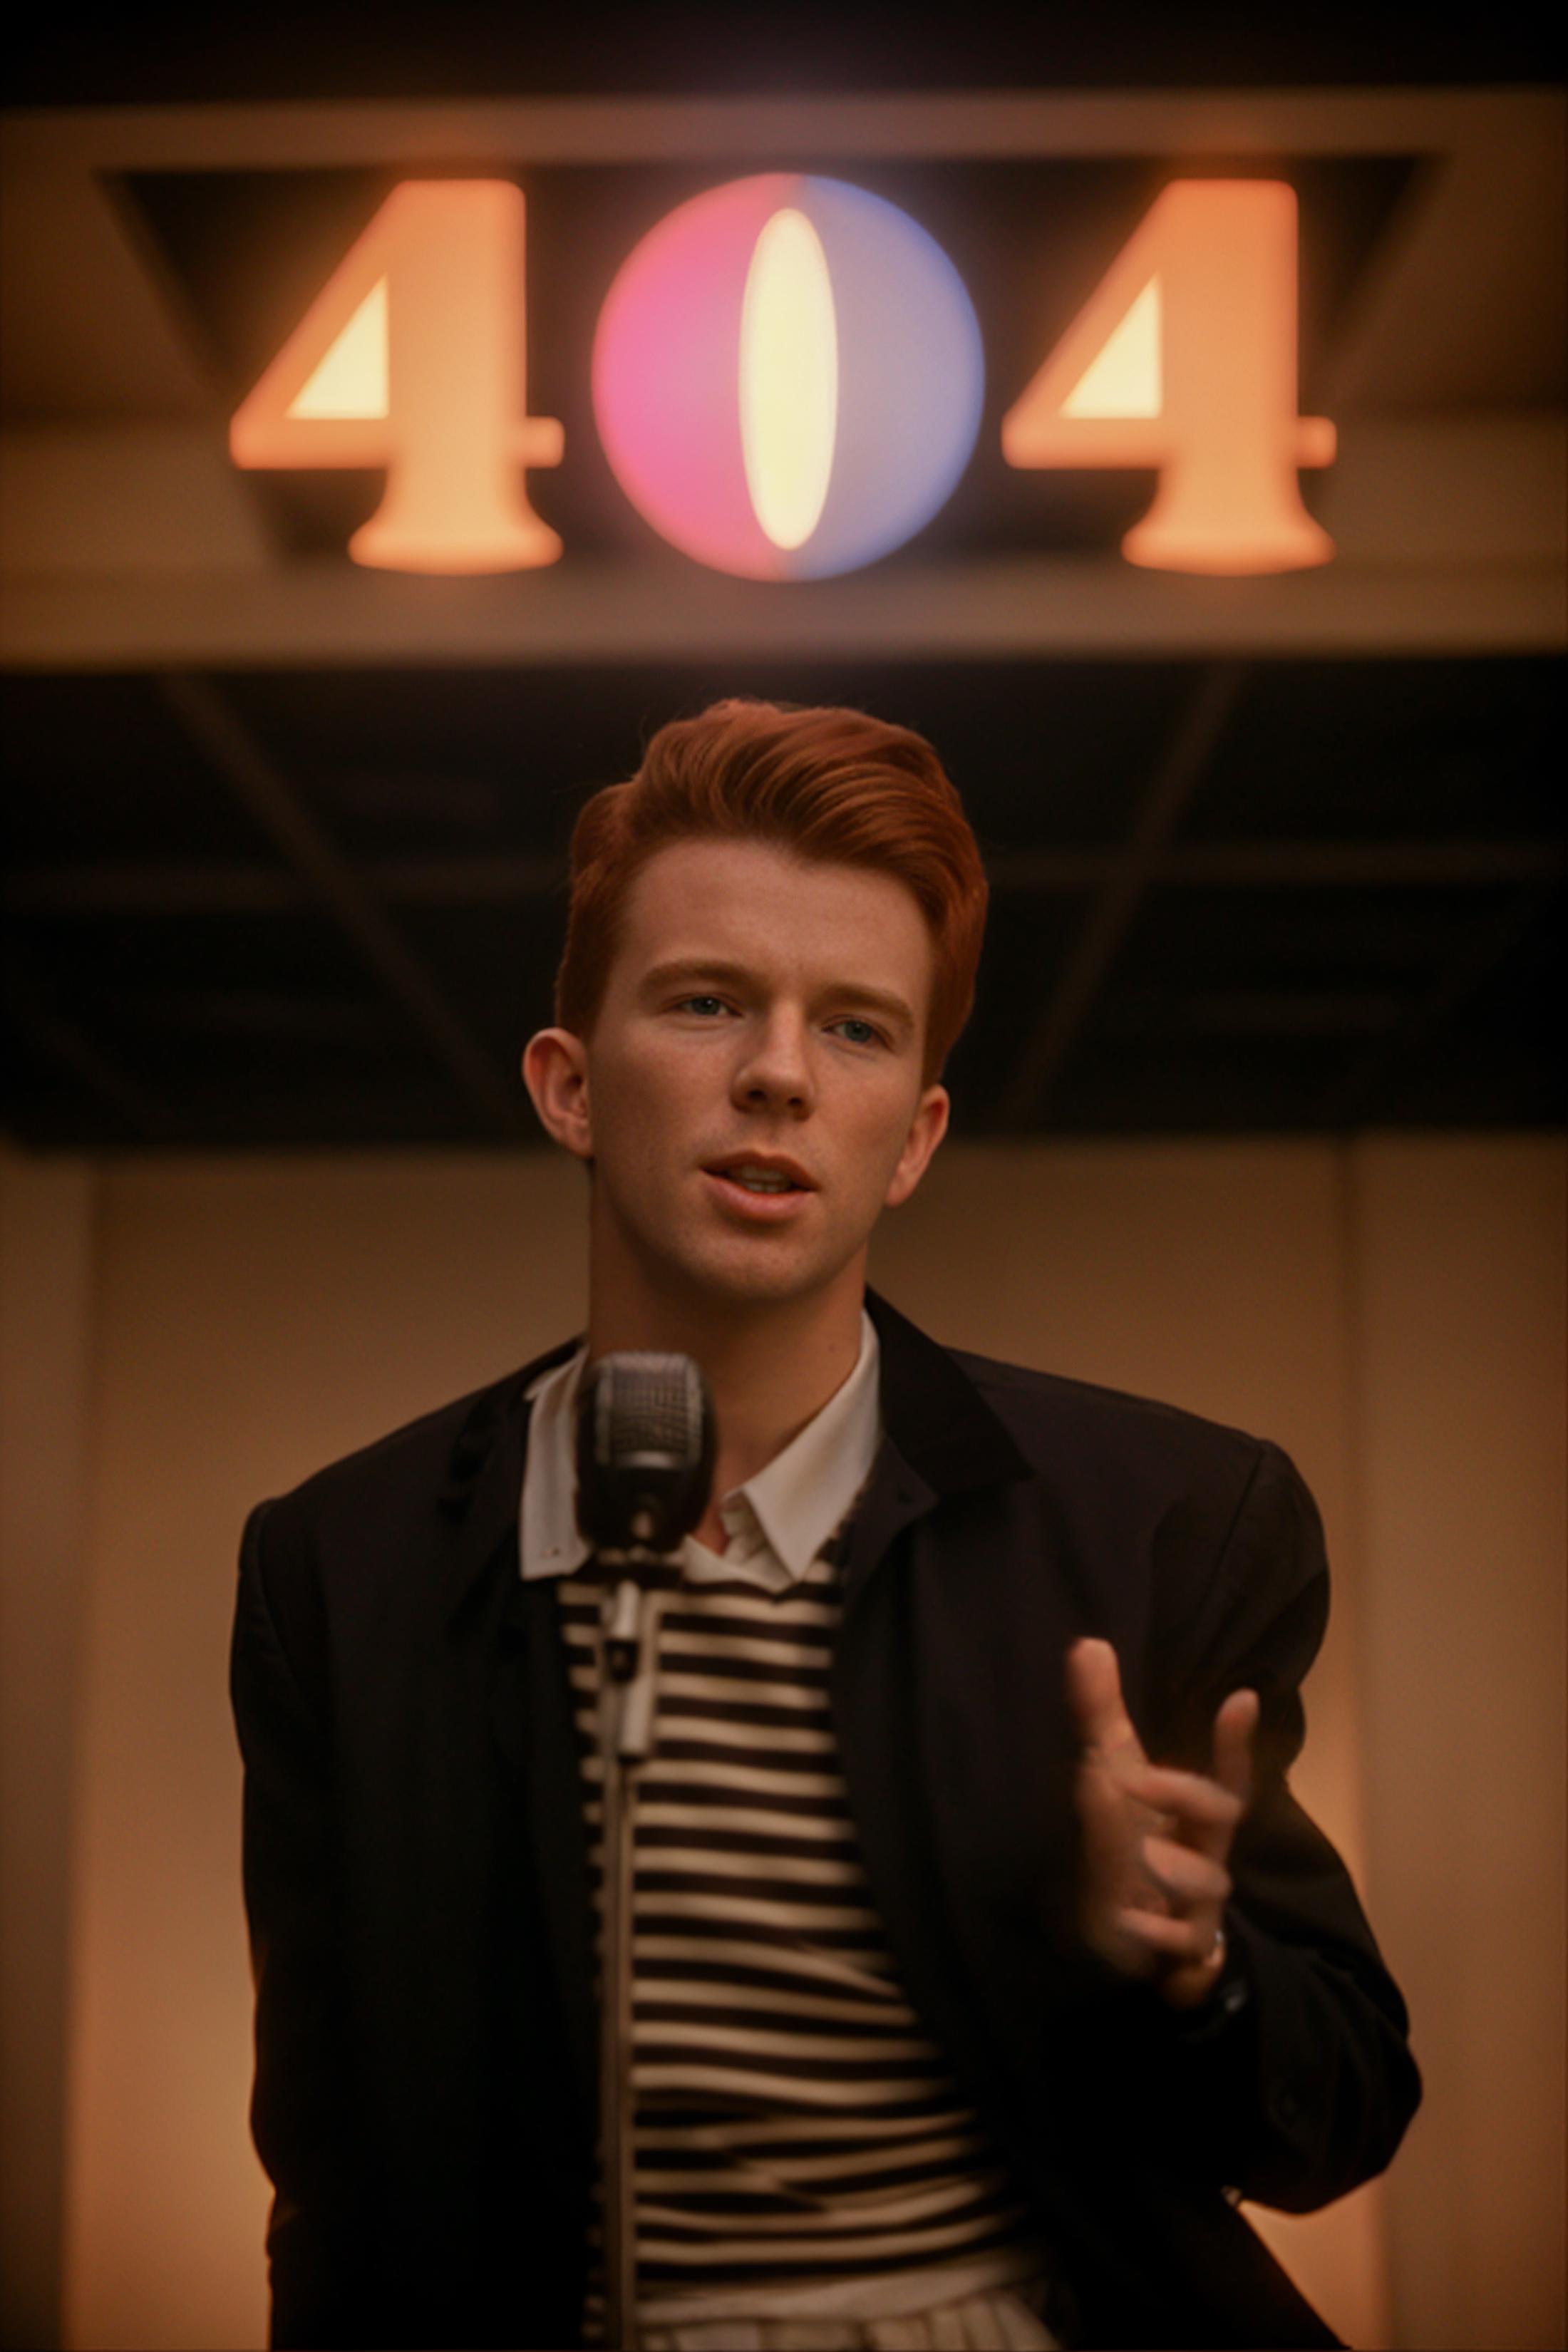 A man with red hair singing into a microphone.